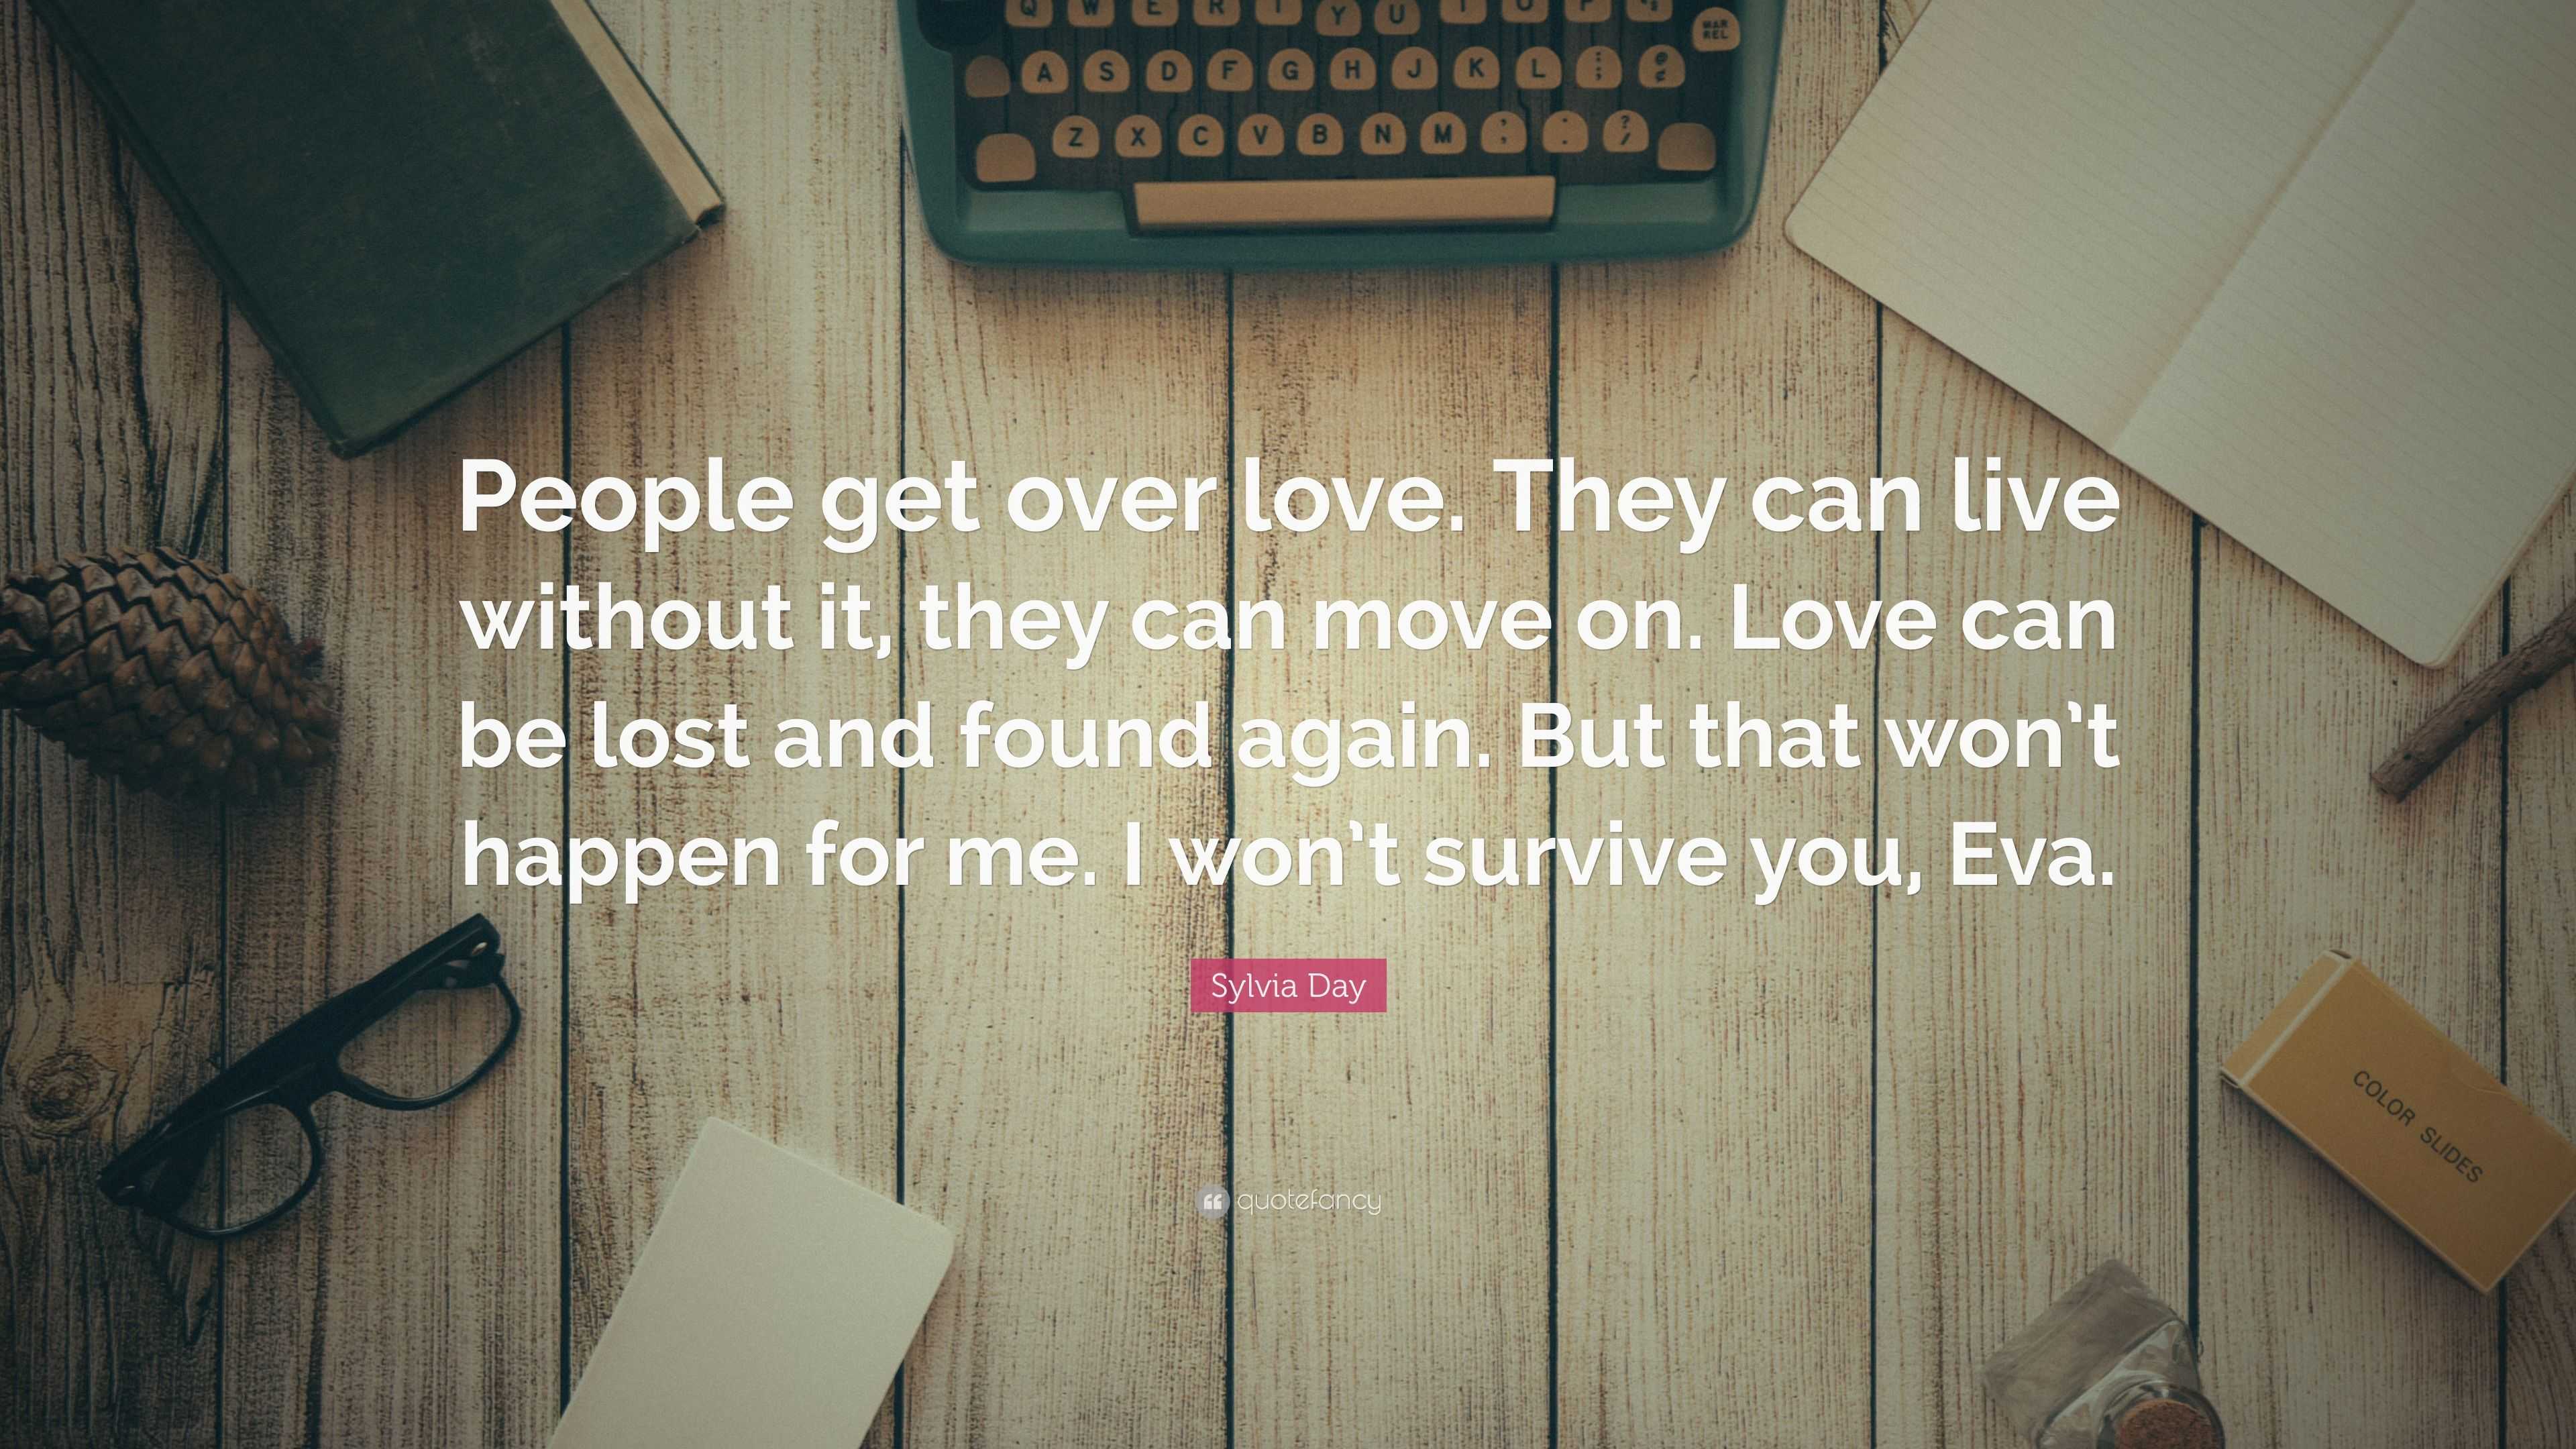 You'll Get Over It - Love Quotes